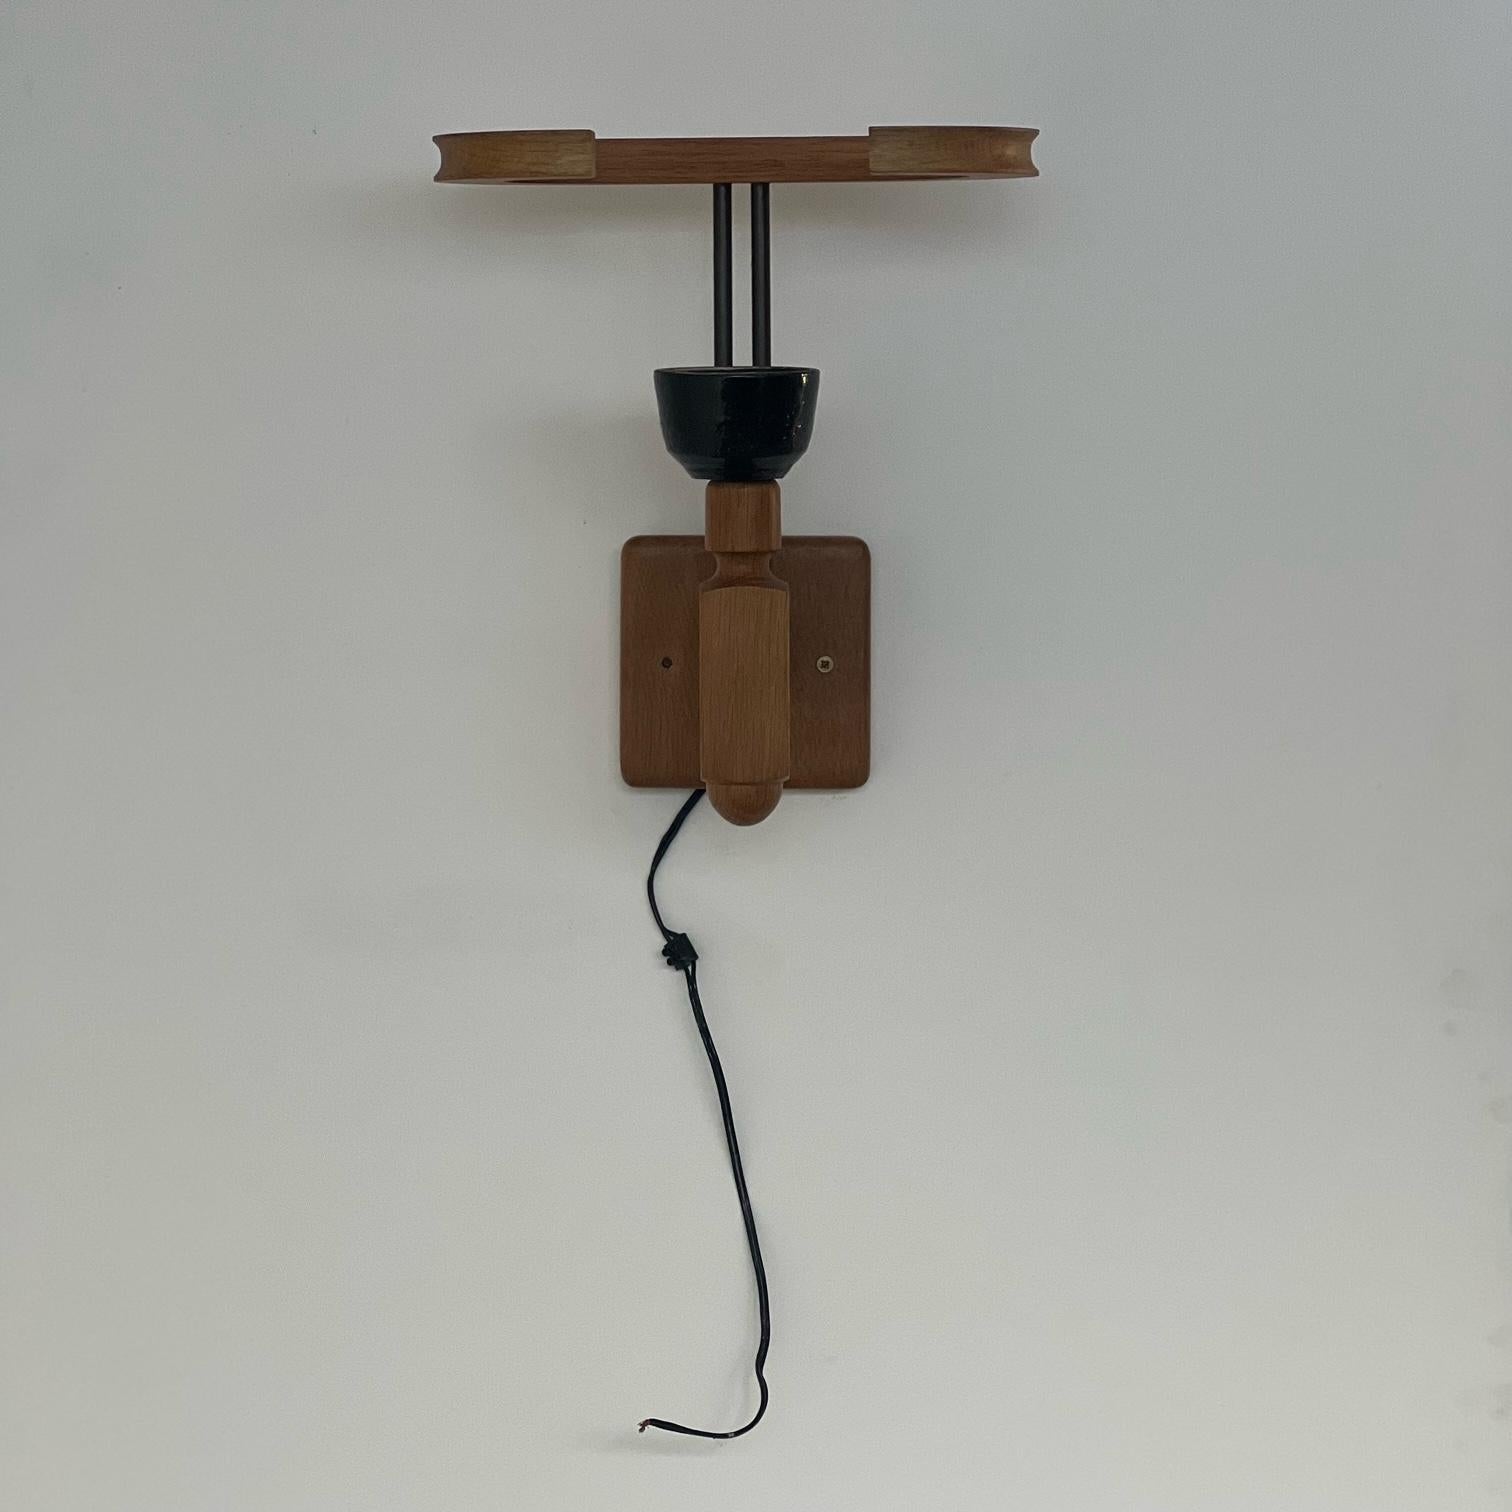 A single wall light in oak and ceramics. 

France, c1960s. 

By French designers Guillerme et Chambron. 

Since Re-wired and PAT Tested.

Internal ref: No.7

Location: Belgium Gallery. 

Dimensions: 36 H x 26 D x 31 W in cm.